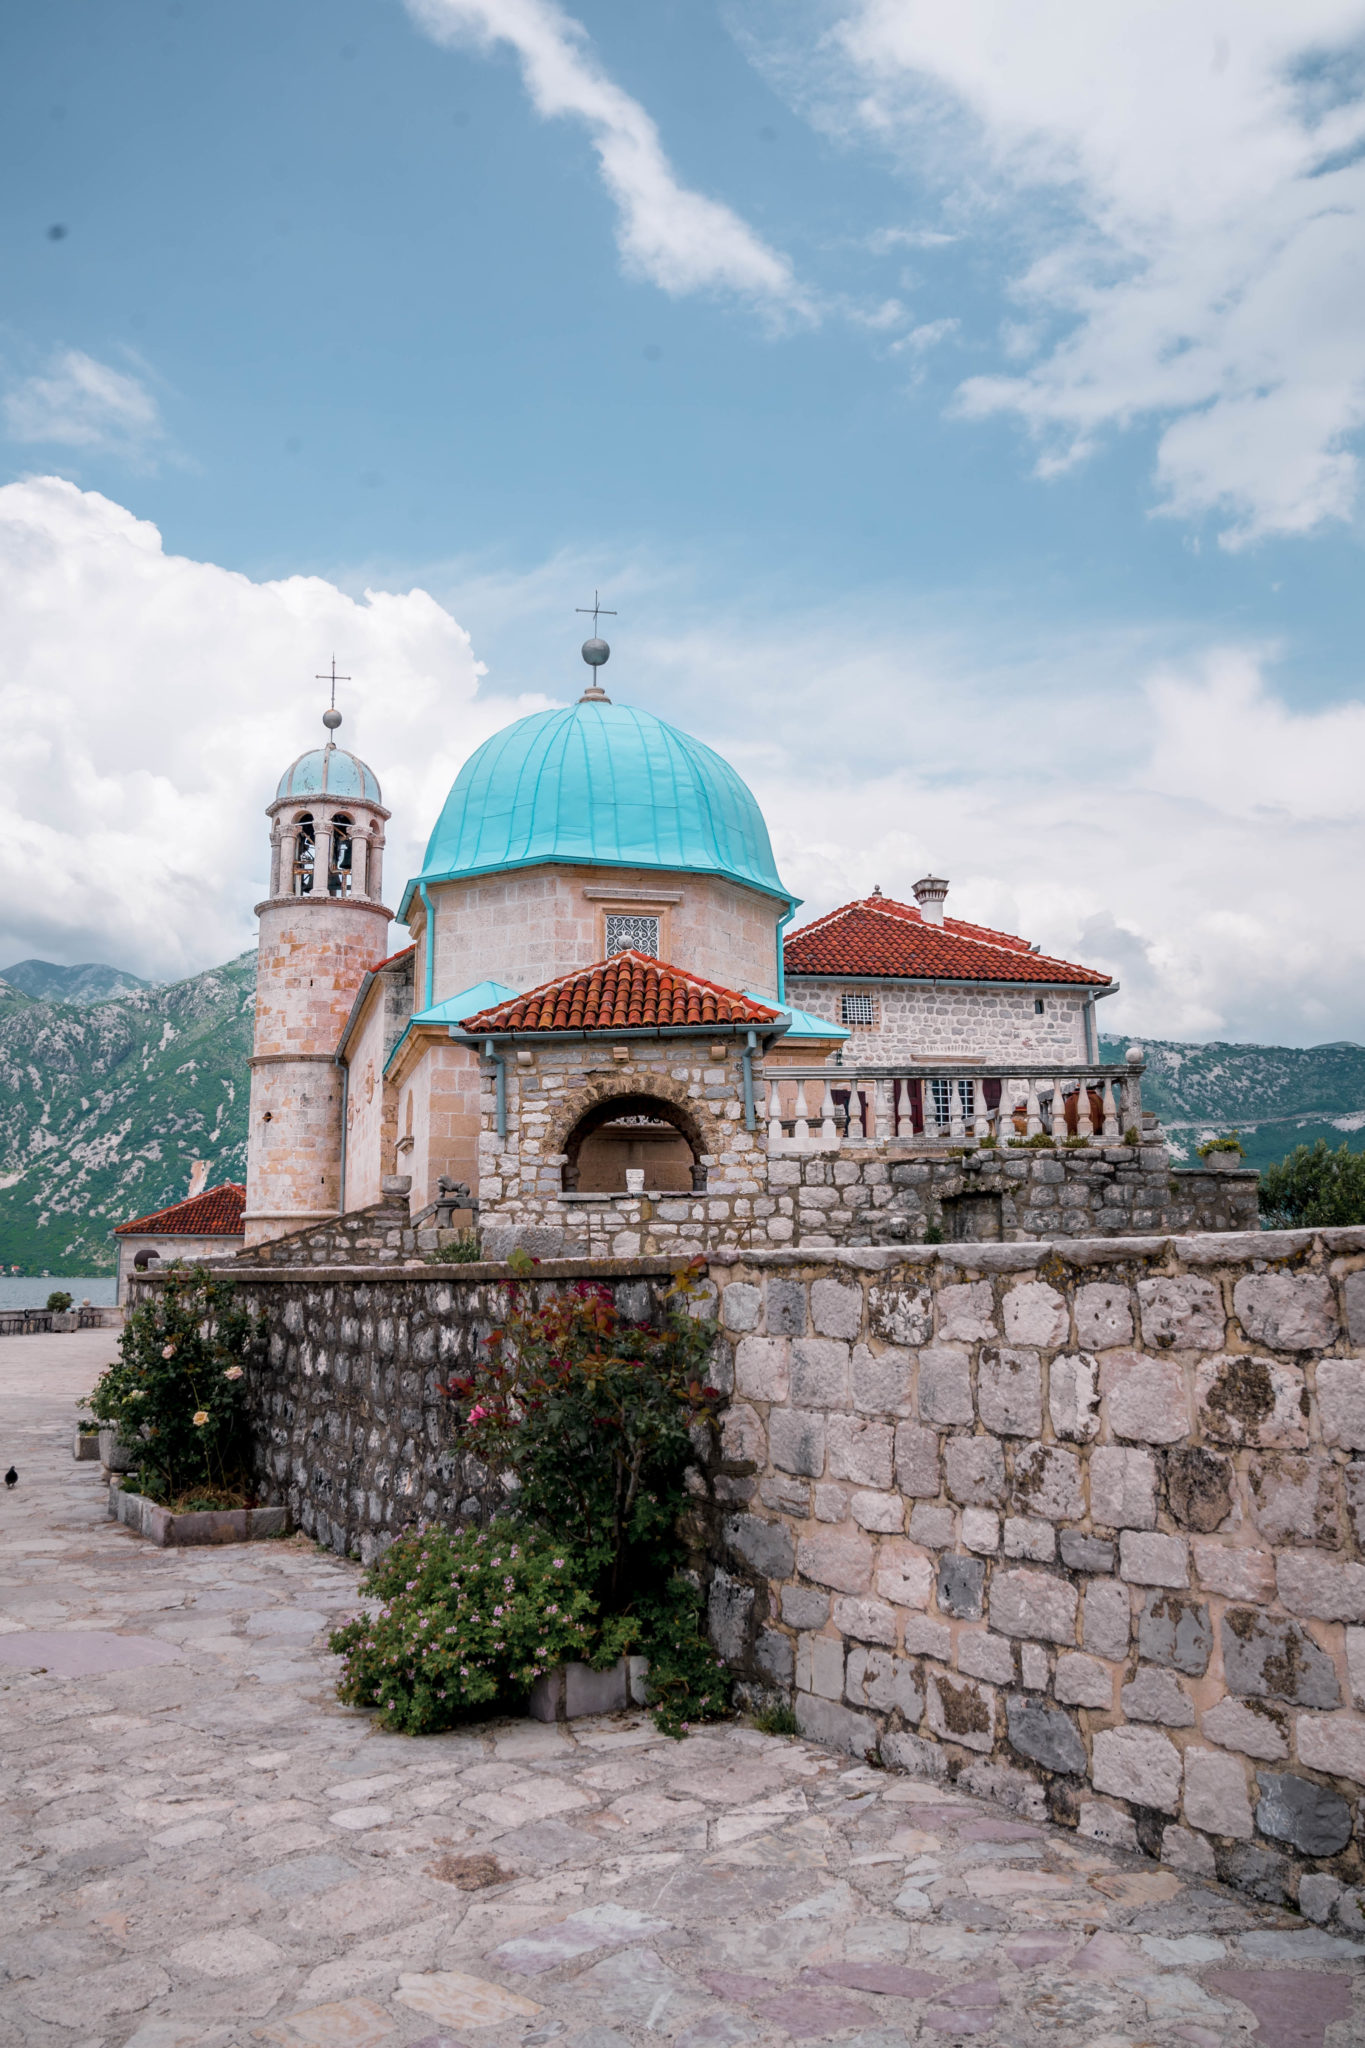 The Best of the Balkans: 20 Places not to miss!